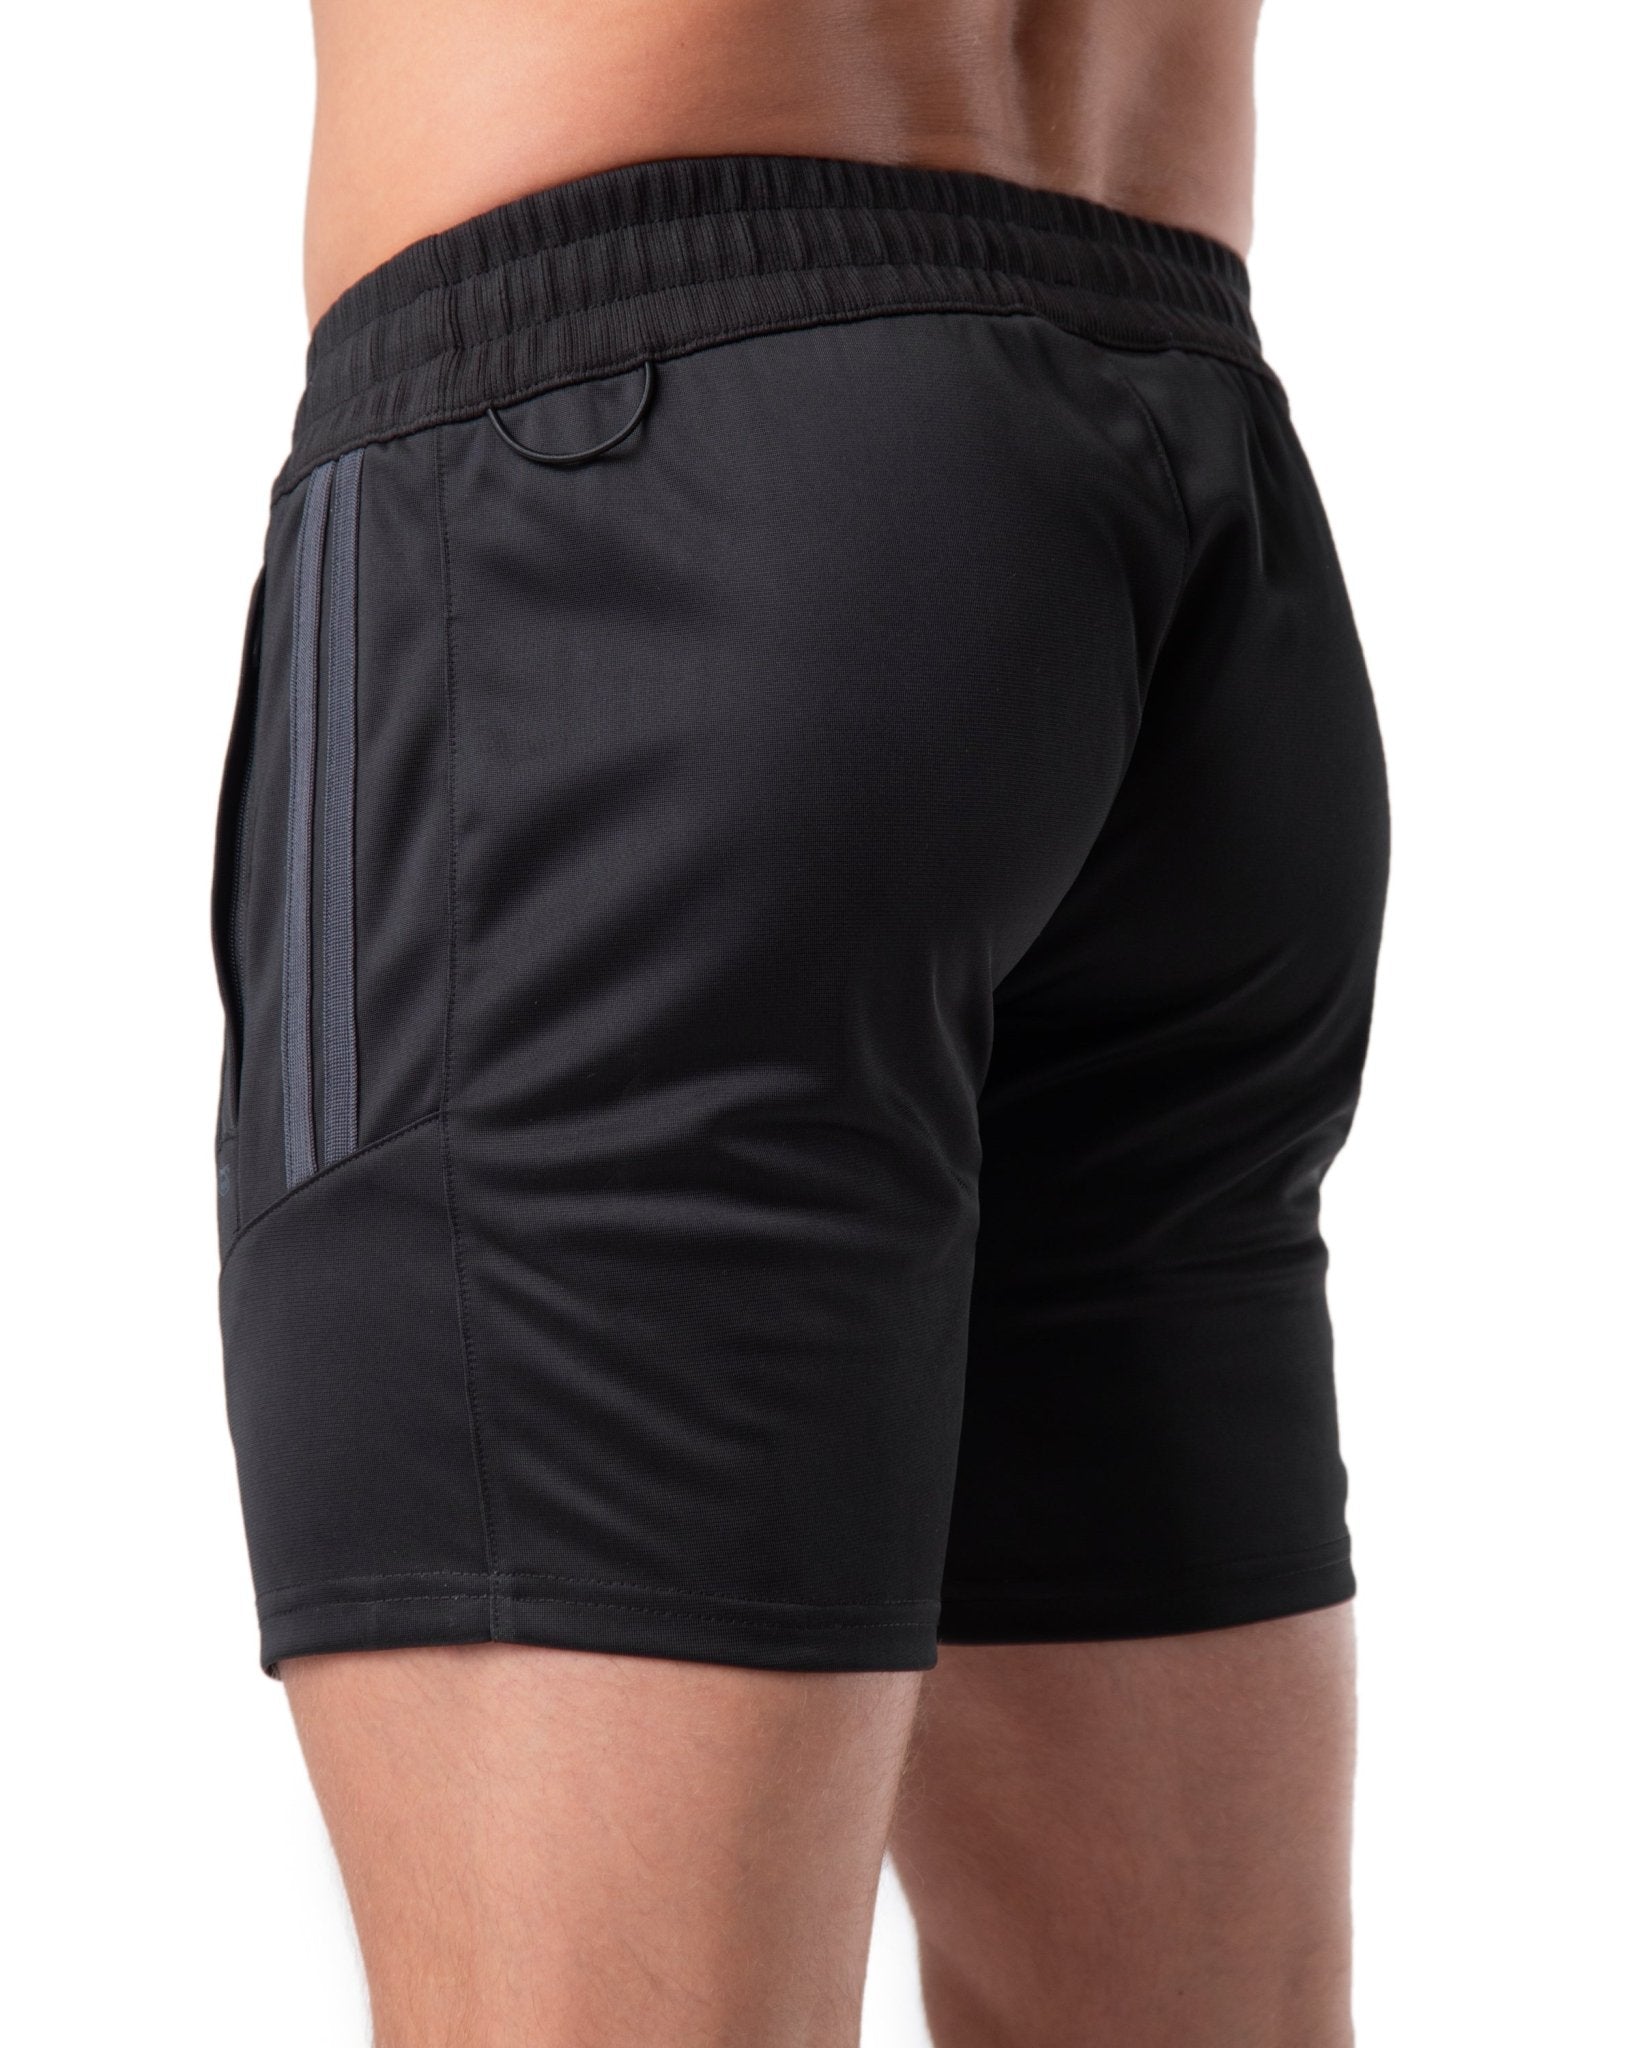 Shadow Rugby Short - Nasty Pig